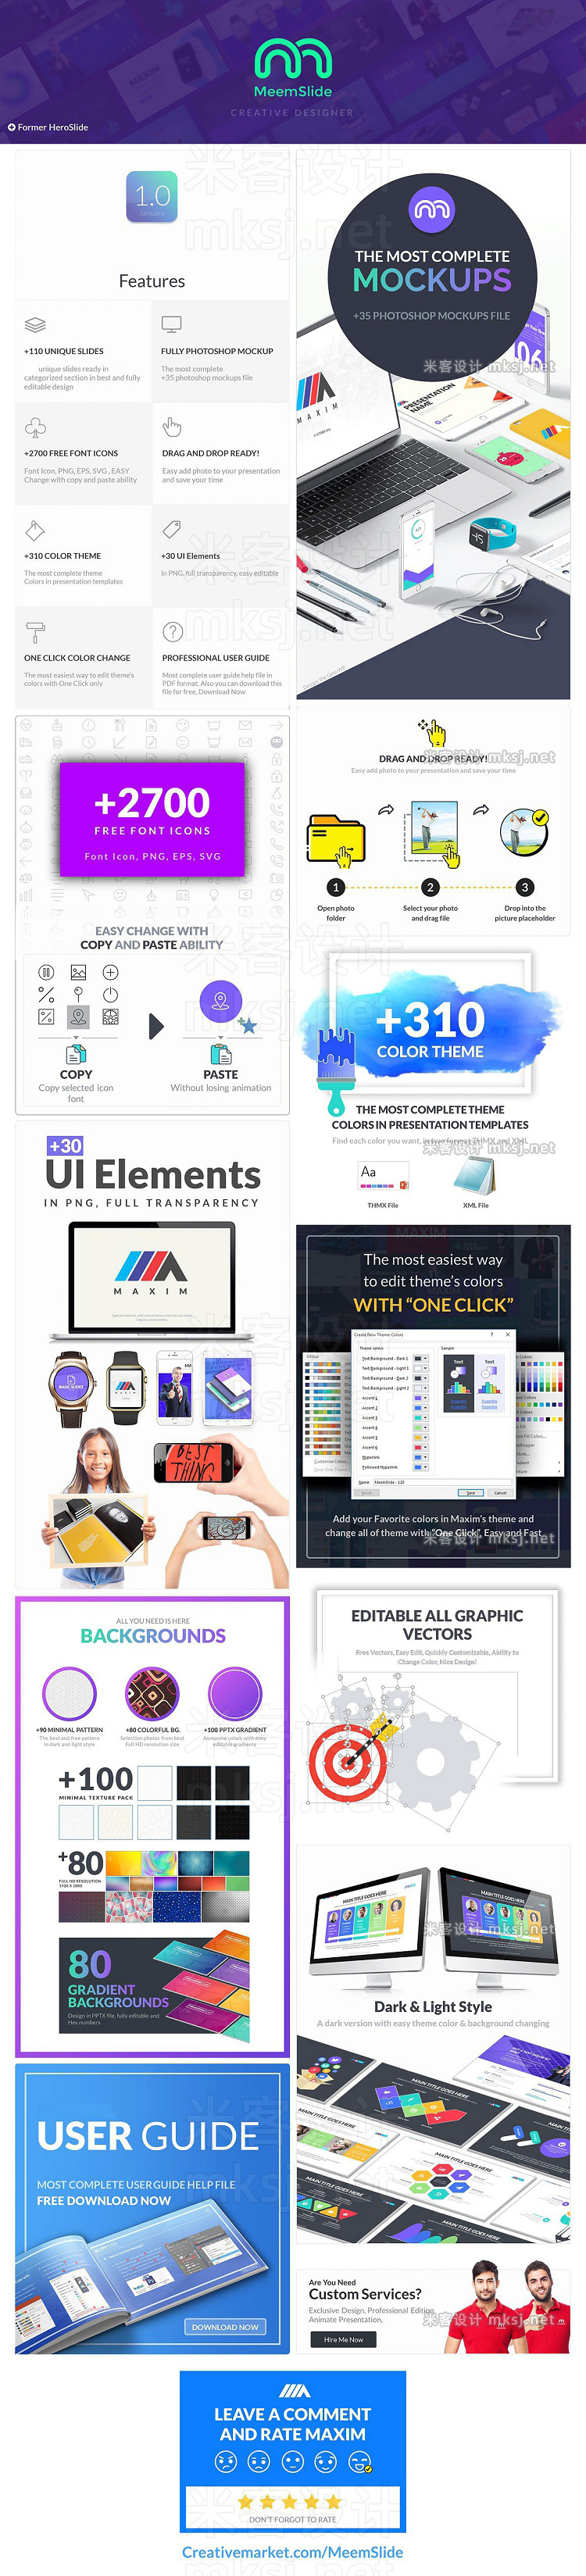 PPT模板 Salam RTL Powerpoint Template